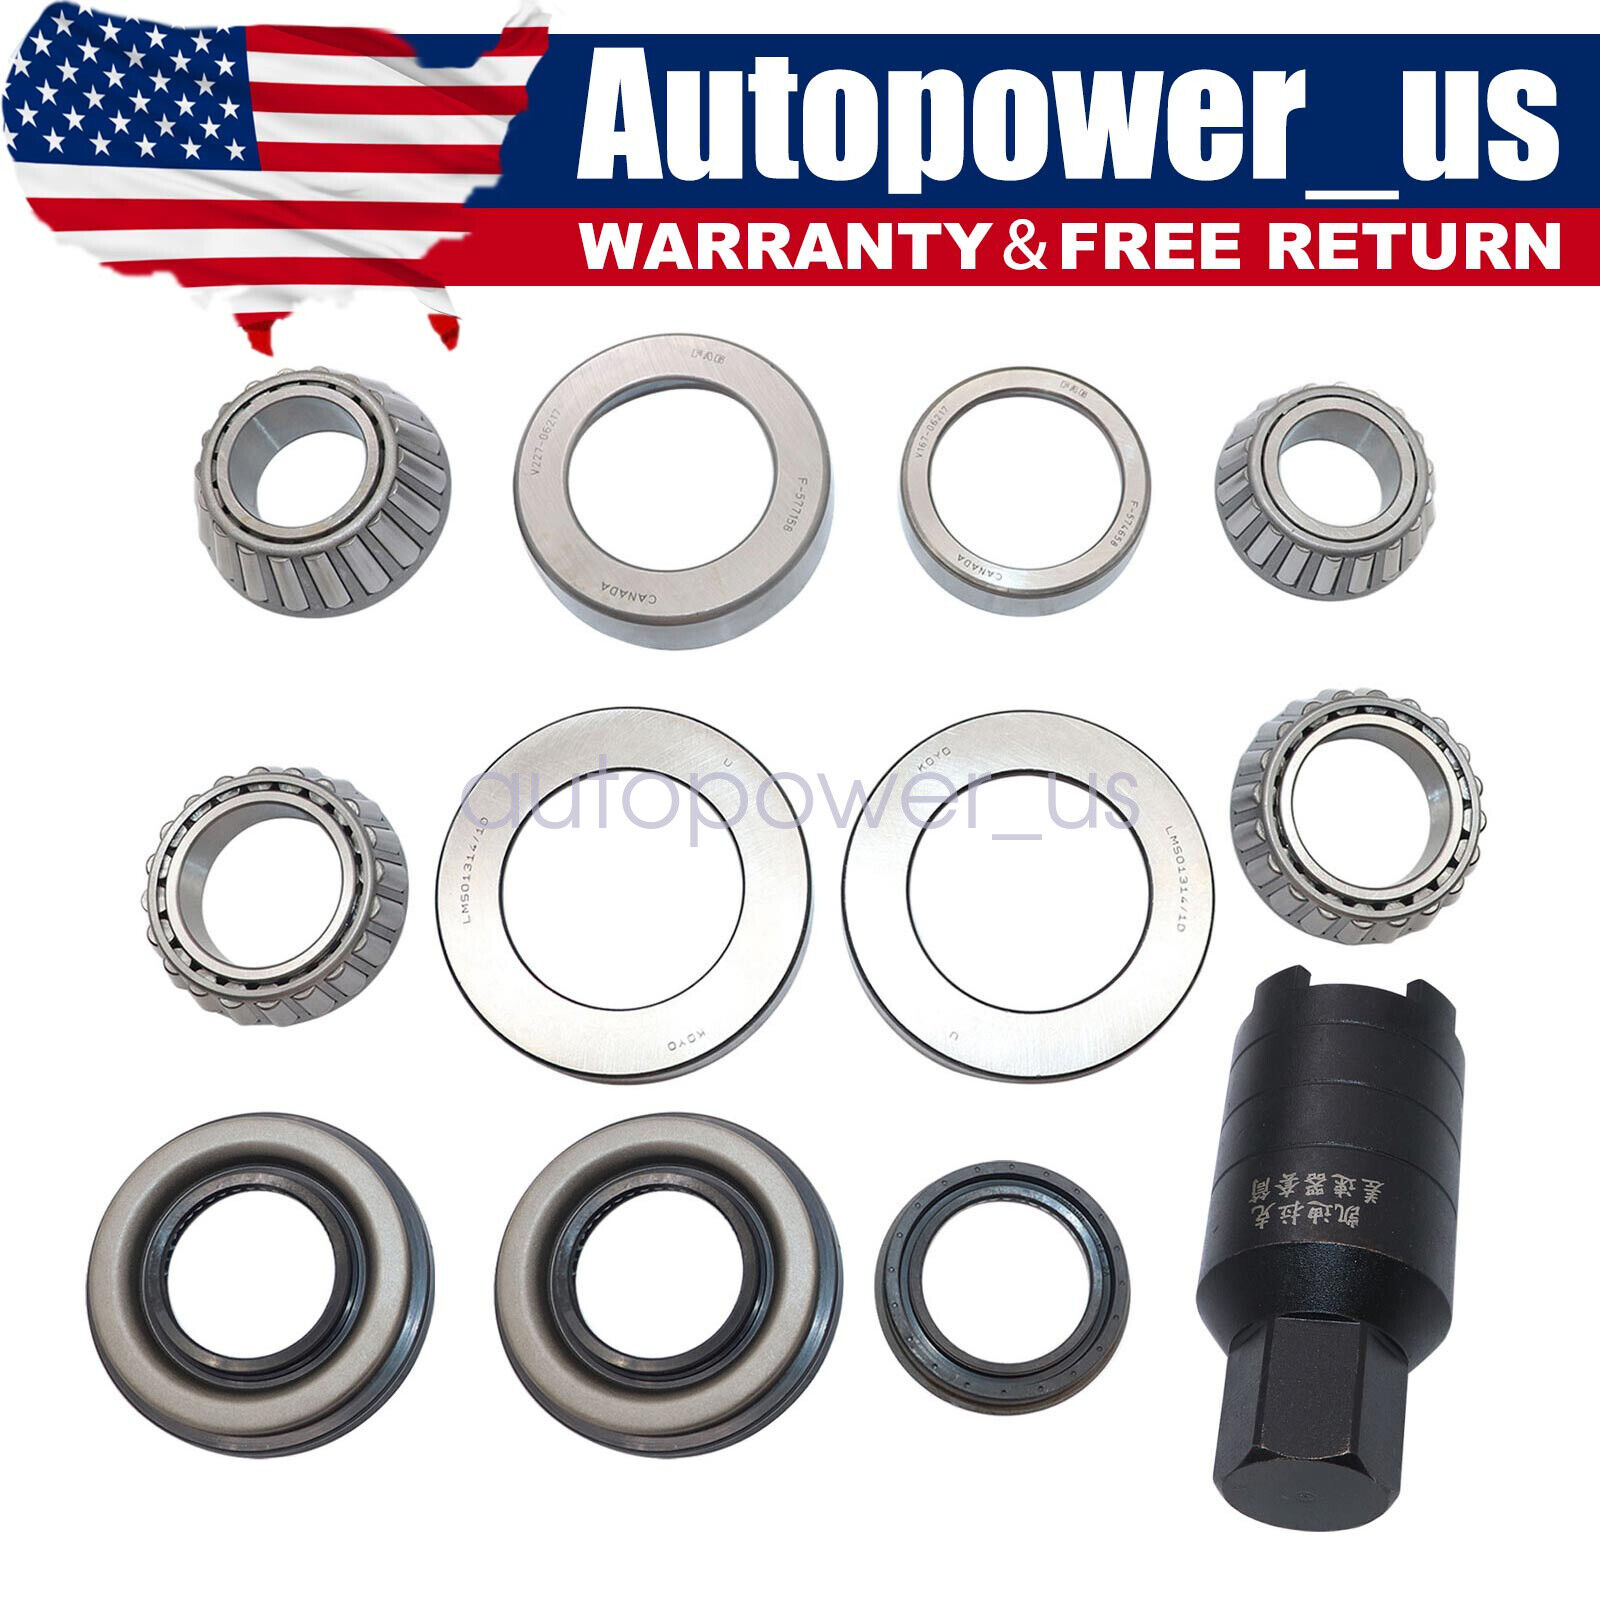 Rear Differential Bearing Repair Kit & Removal Tool For Cadillac ATS CTS 13-19